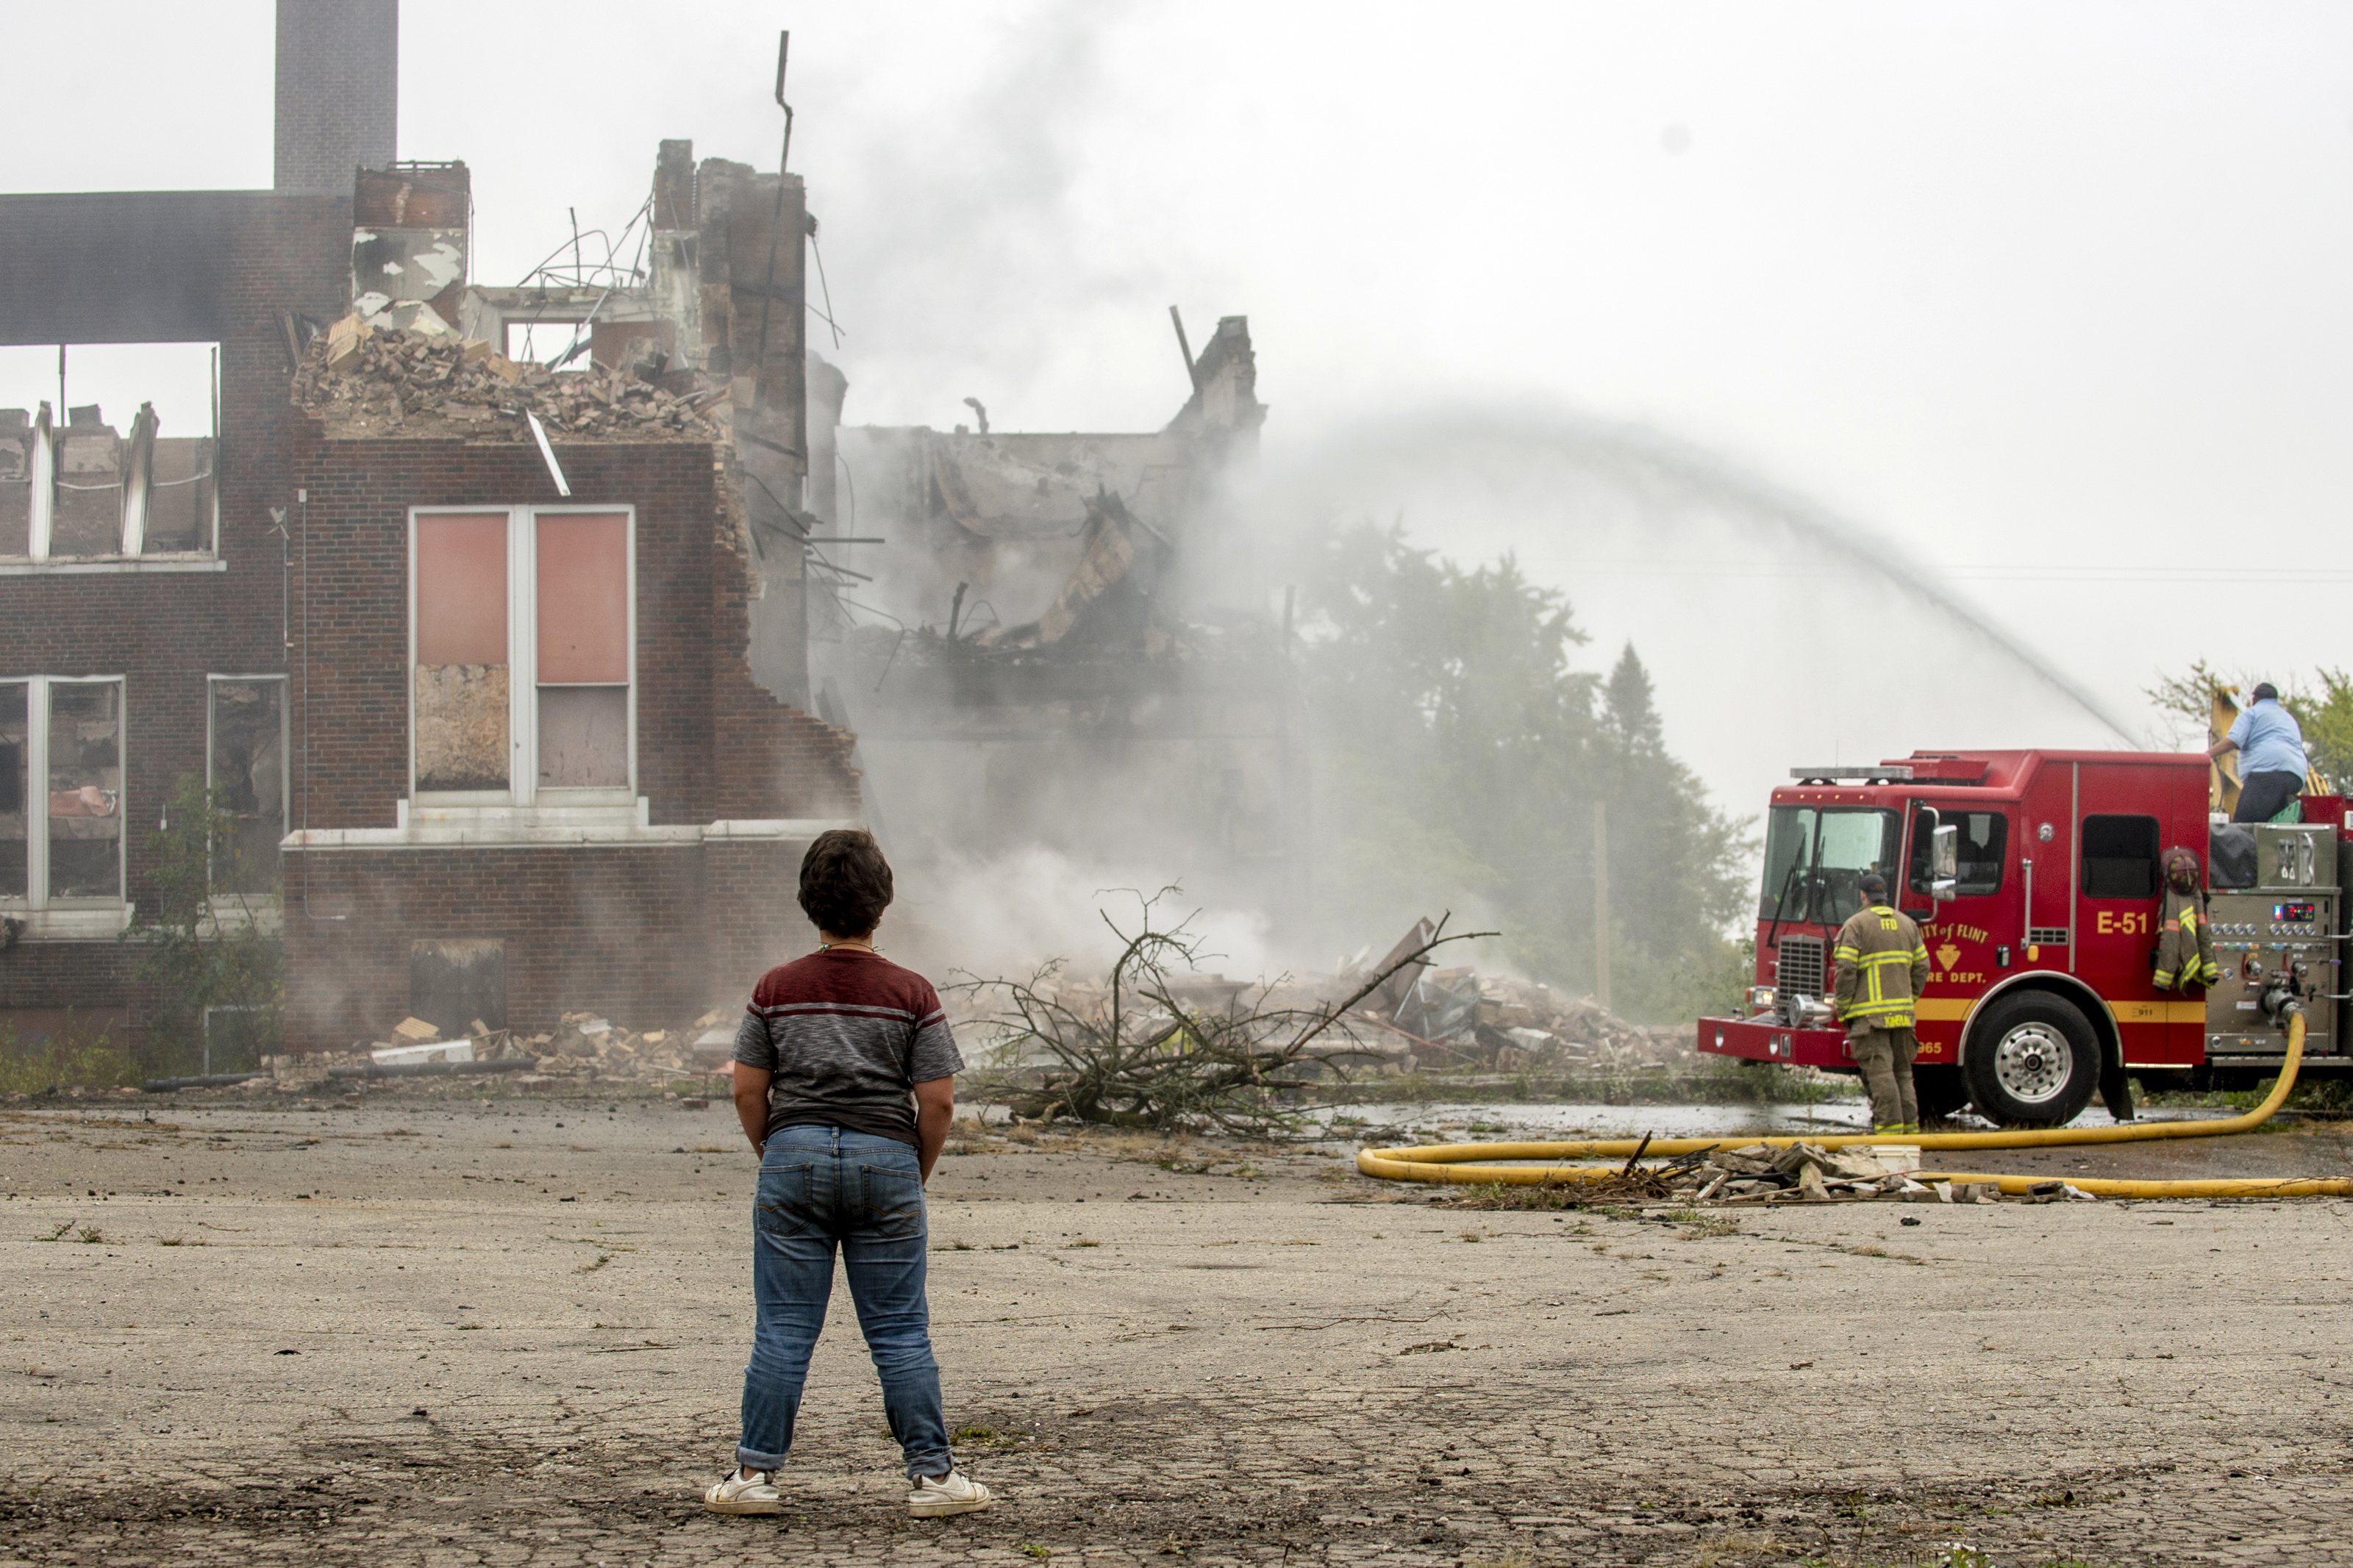 Flint residents and neighbors gather to watch the flames and smoke rise as firefighters work to contain a fire that started at about 12:30 a.m. on Thursday Oct. 7, 2021 at the former Washington Elementary School, located at 1400 N. Vernon Ave. in Flint. The building was built in 1922 before closing in 2013. (Jake May | MLive.com)